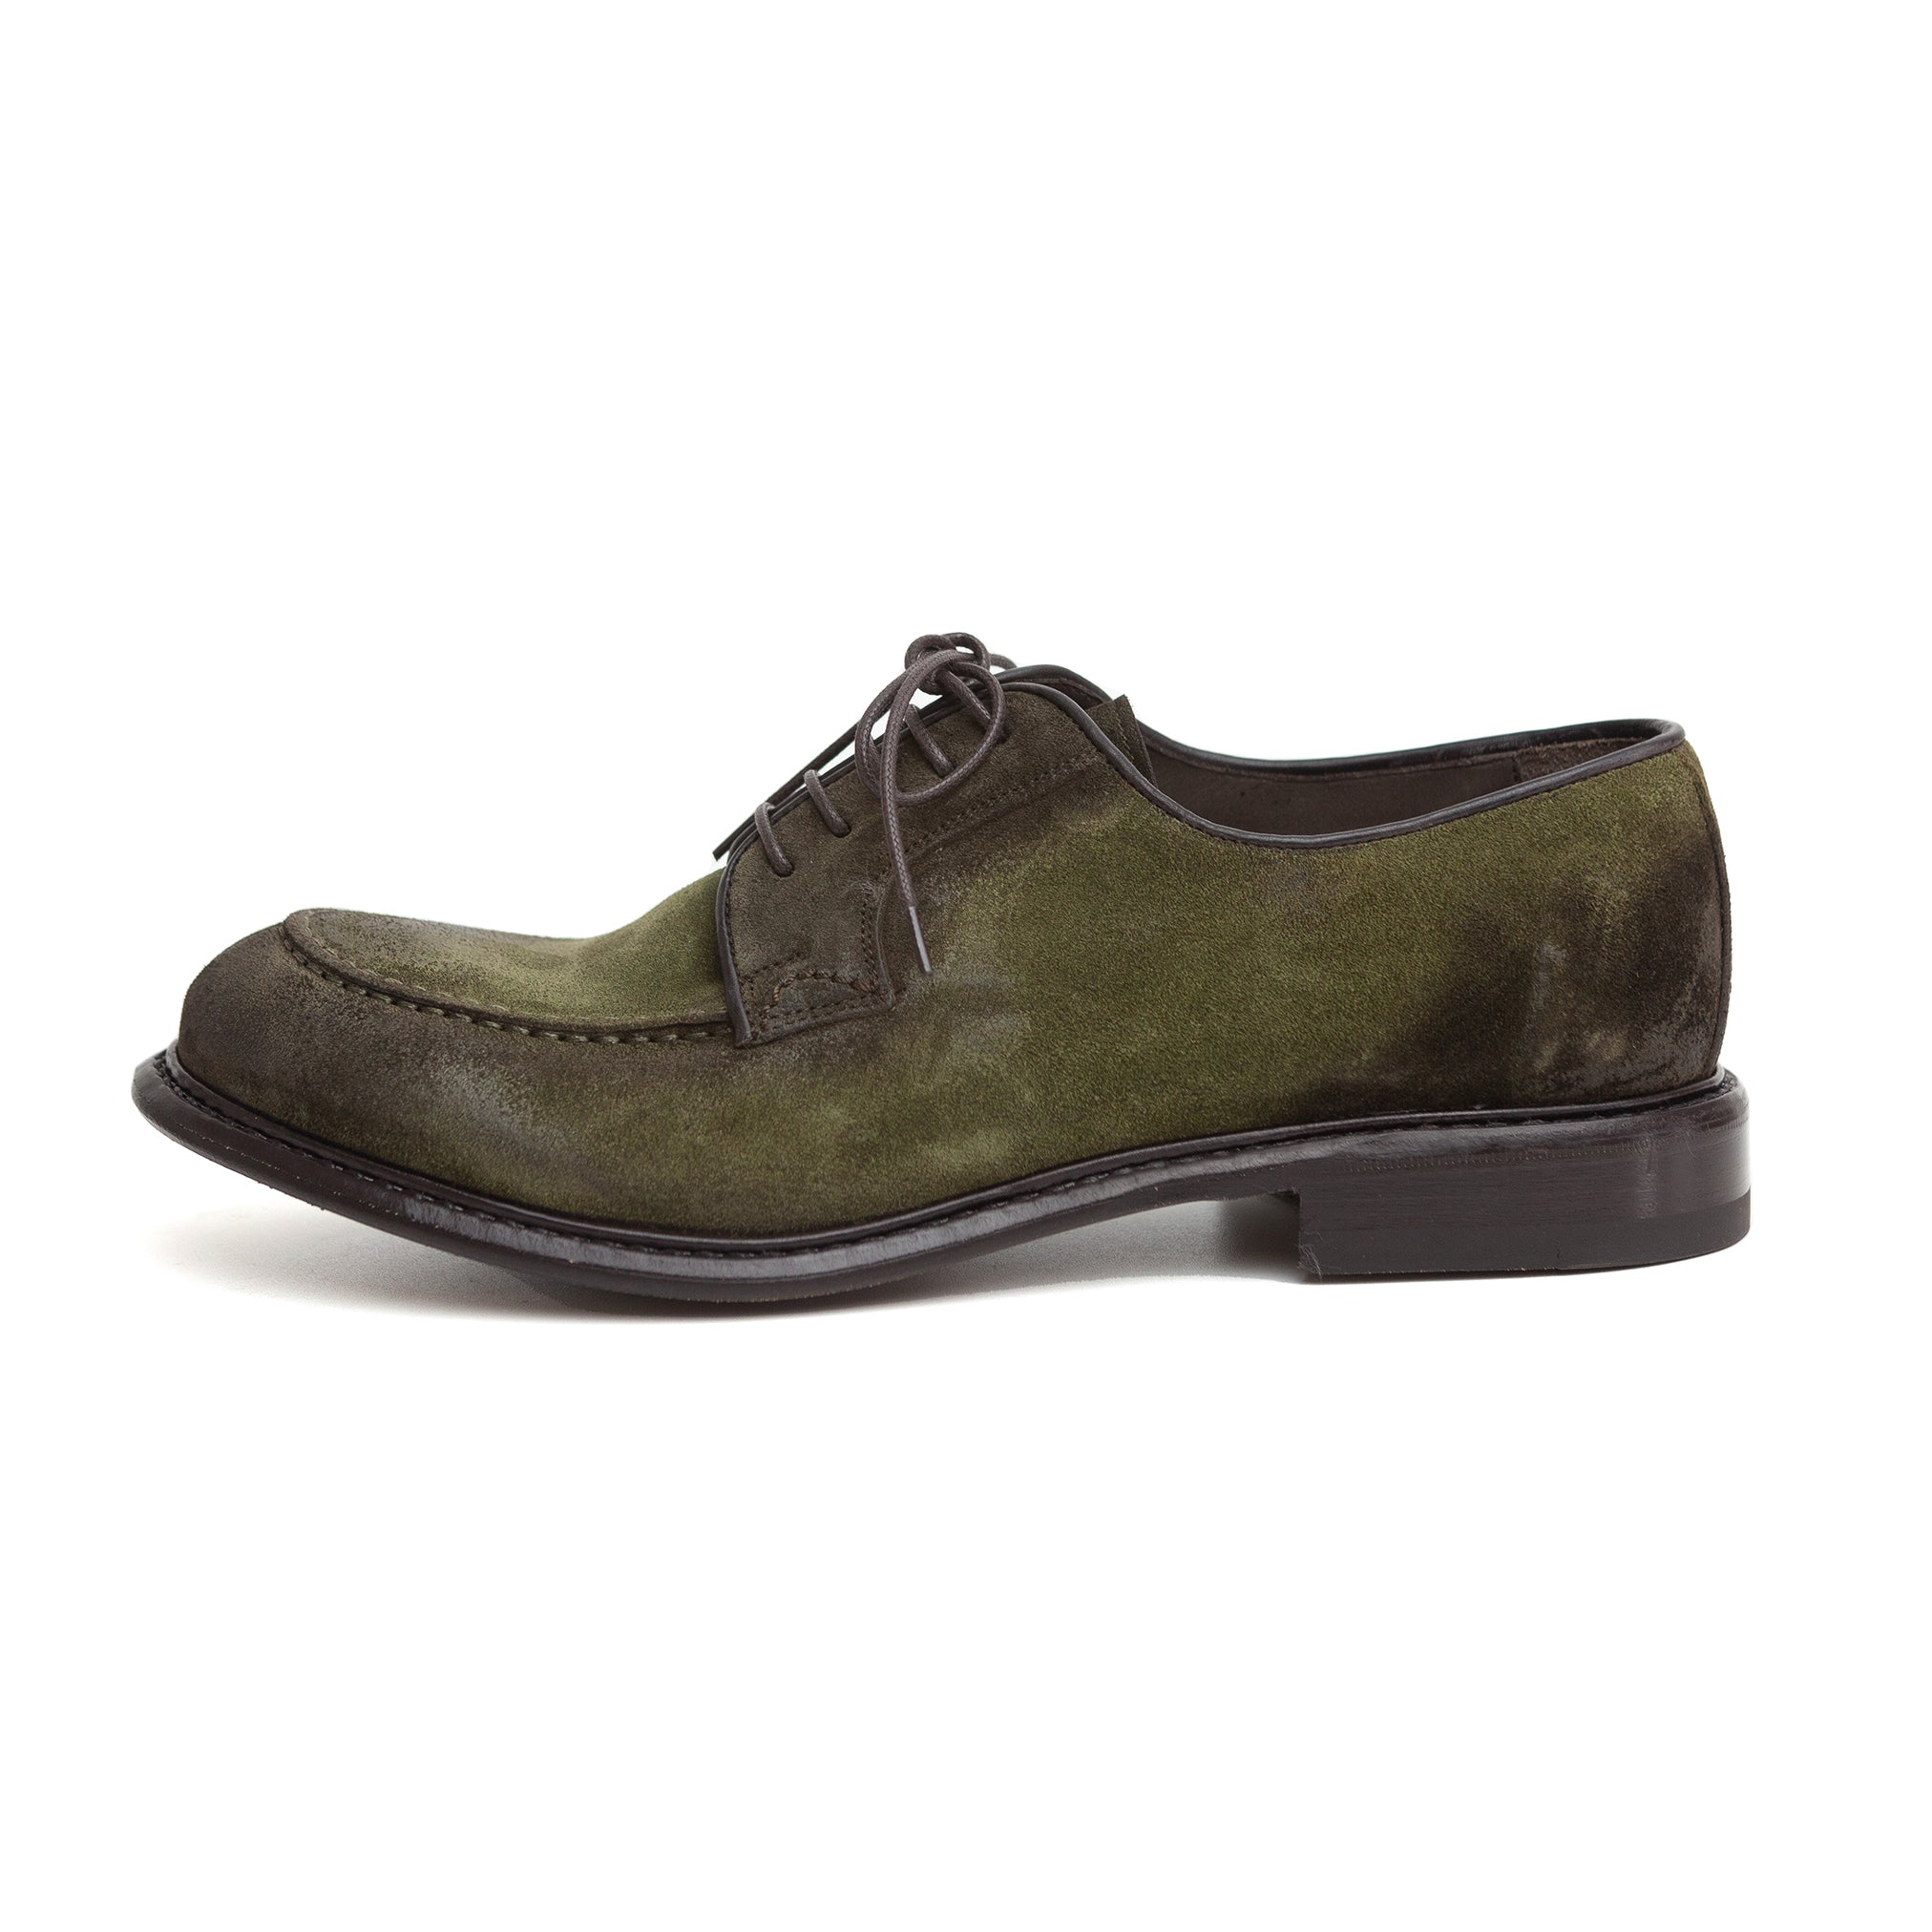 The Derby Shoe in Olive Suede